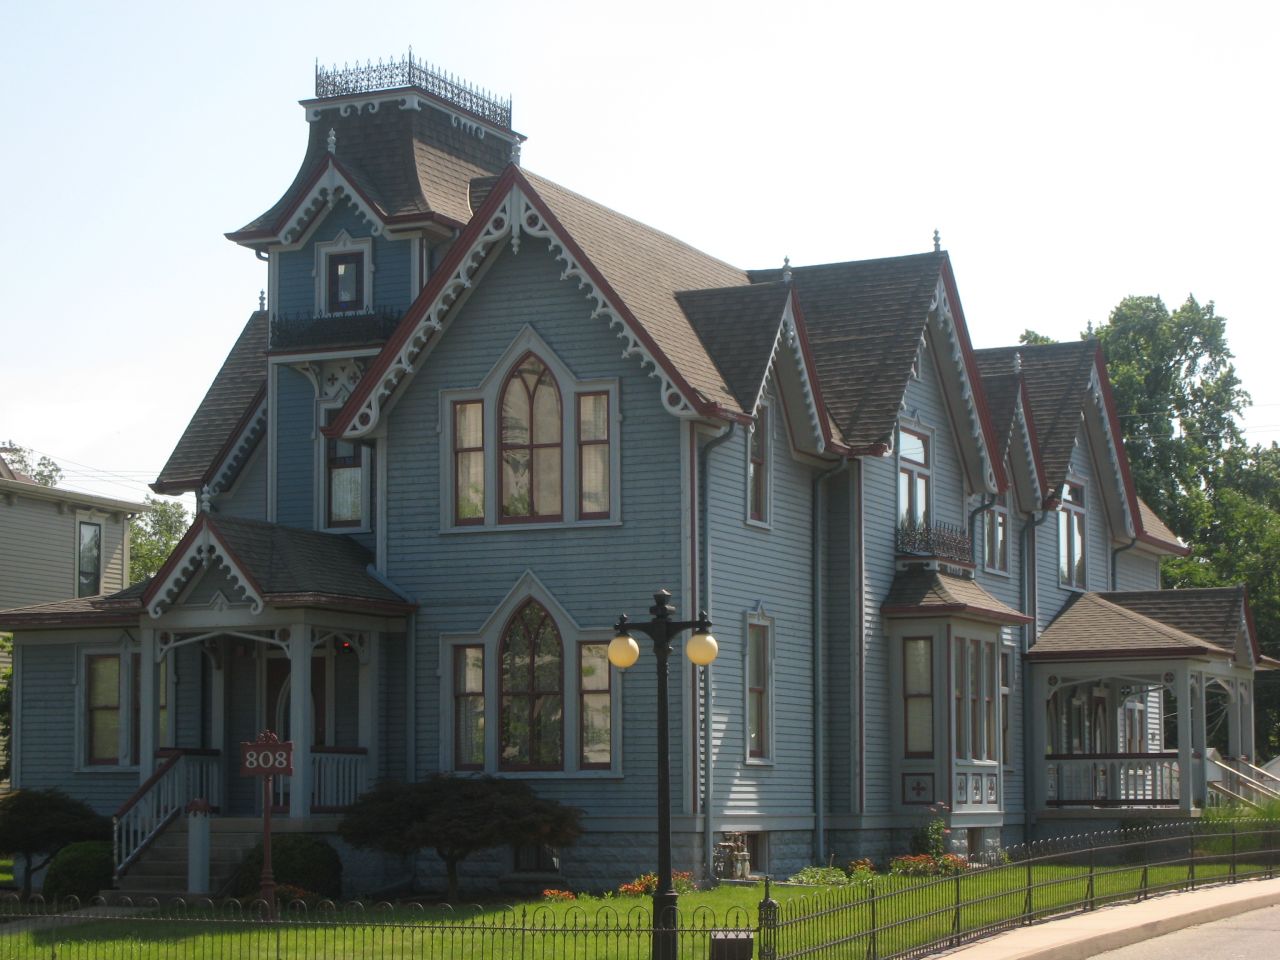 The Elmore & Reid offices are housed in an 1879 Victorian.